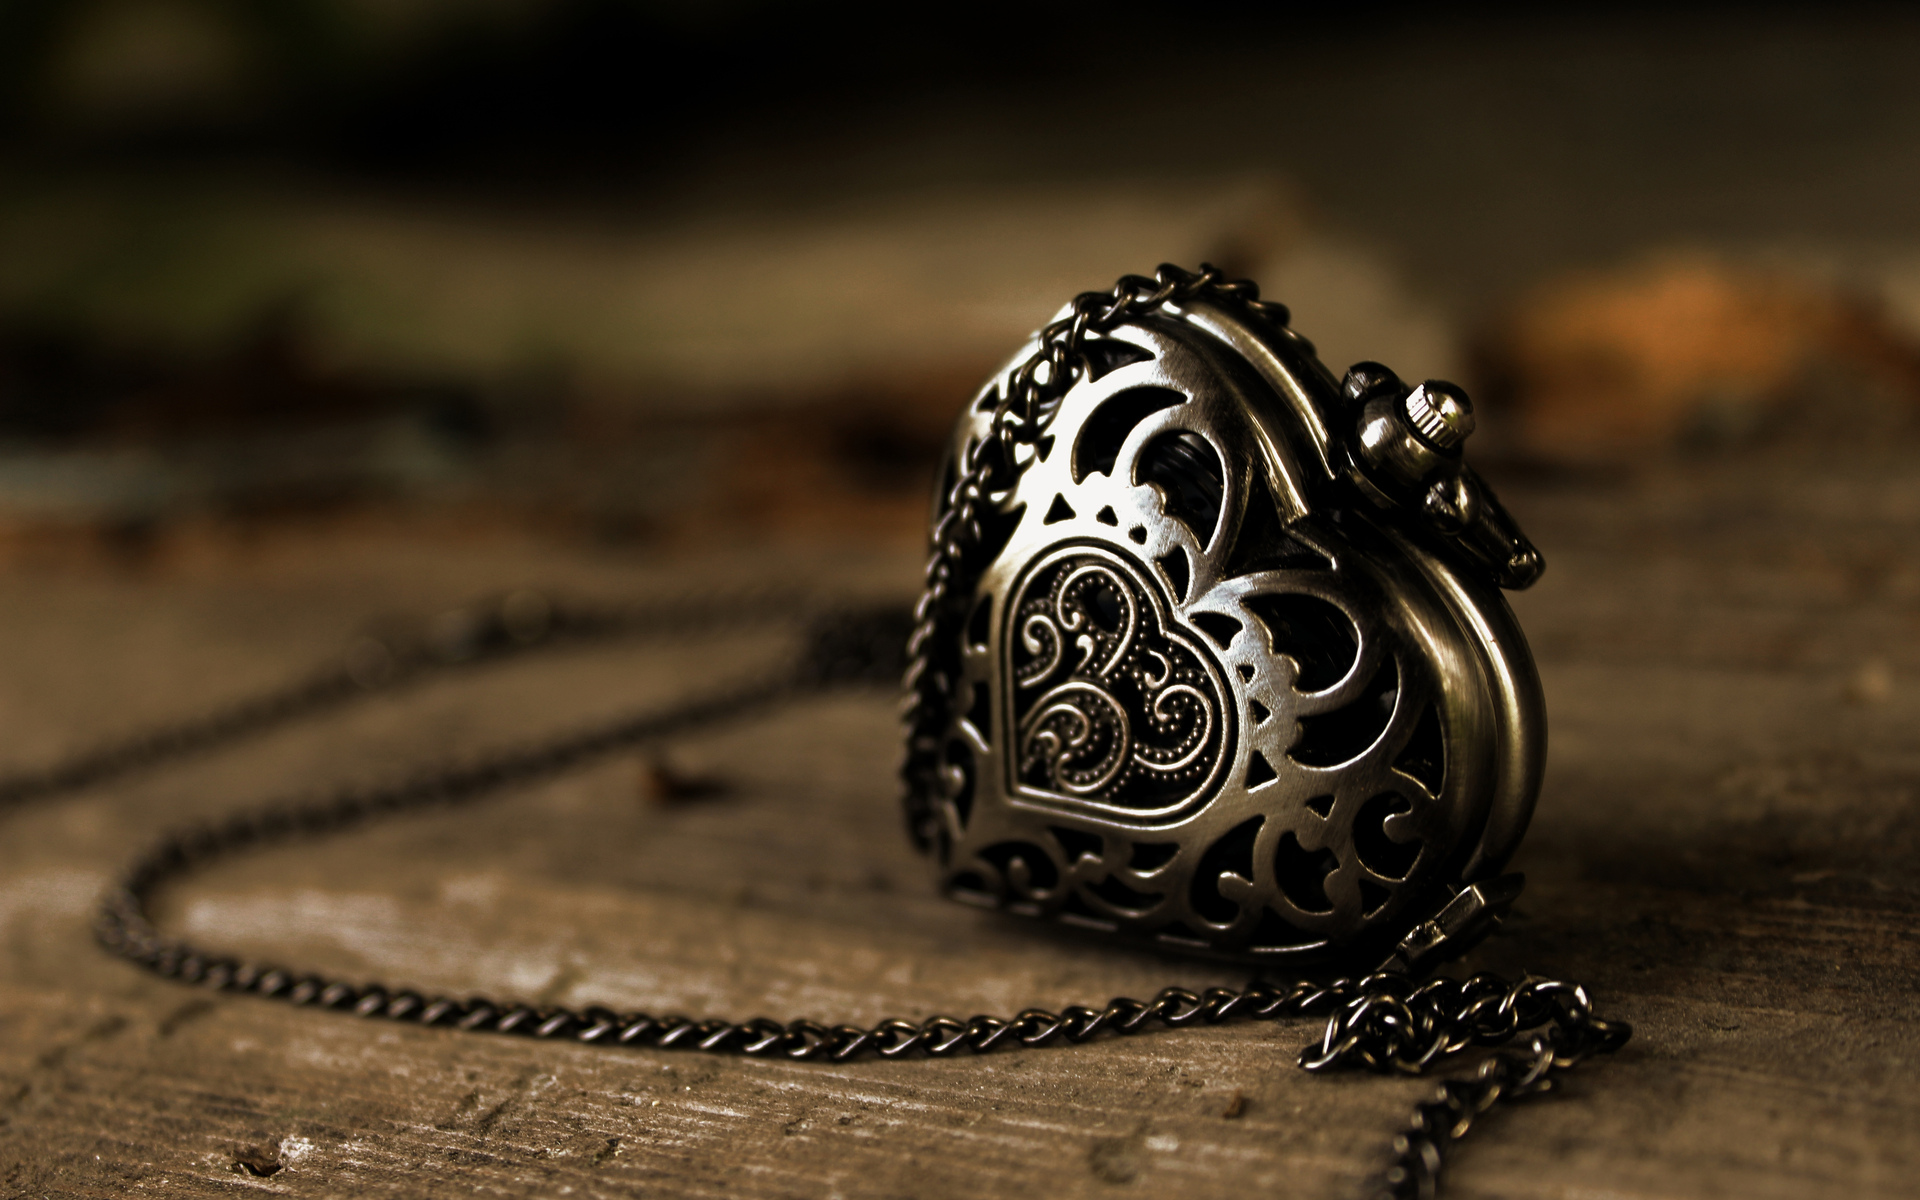 Metal Heart Shaped Pendant Necklace - Love Chain Hd , HD Wallpaper & Backgrounds